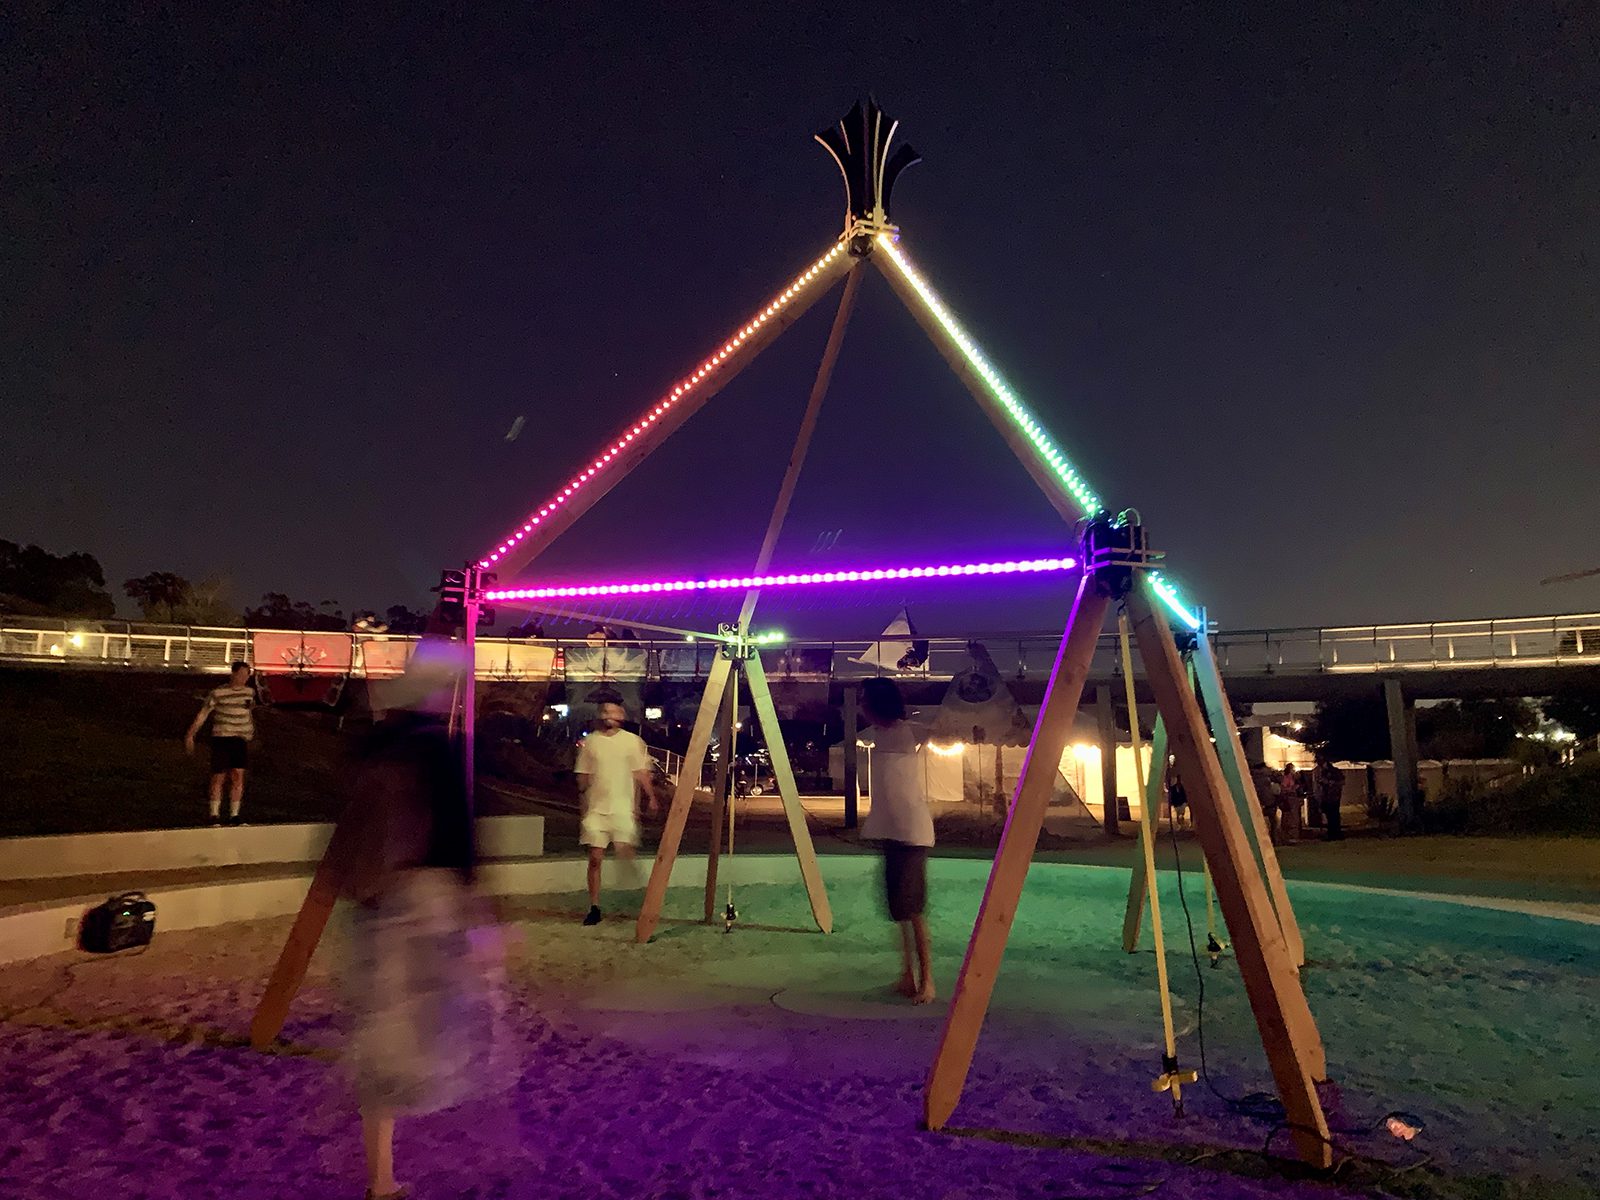 Festival goers interact with an art installation at DisclosureFest, Saturday, June 18, 2022, at the Los Angeles State Historic Park. Photo by Sam Kestenbaum